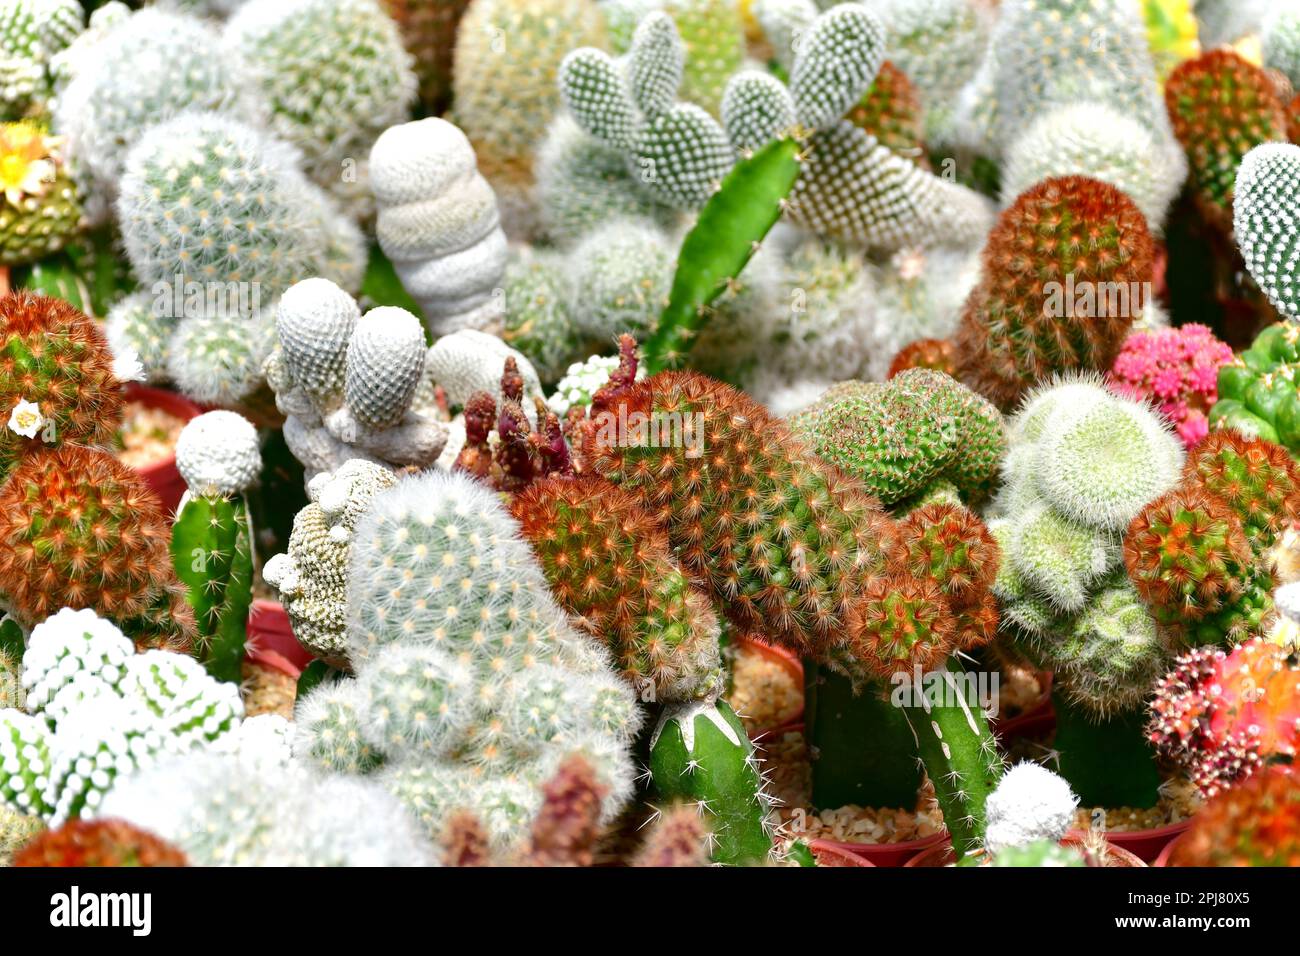 Mammillaria spp., Echinopsis spp., Gymnocalycium spp.. and others small cactus in mixed cactus background in the open cactus farm. Stock Photo